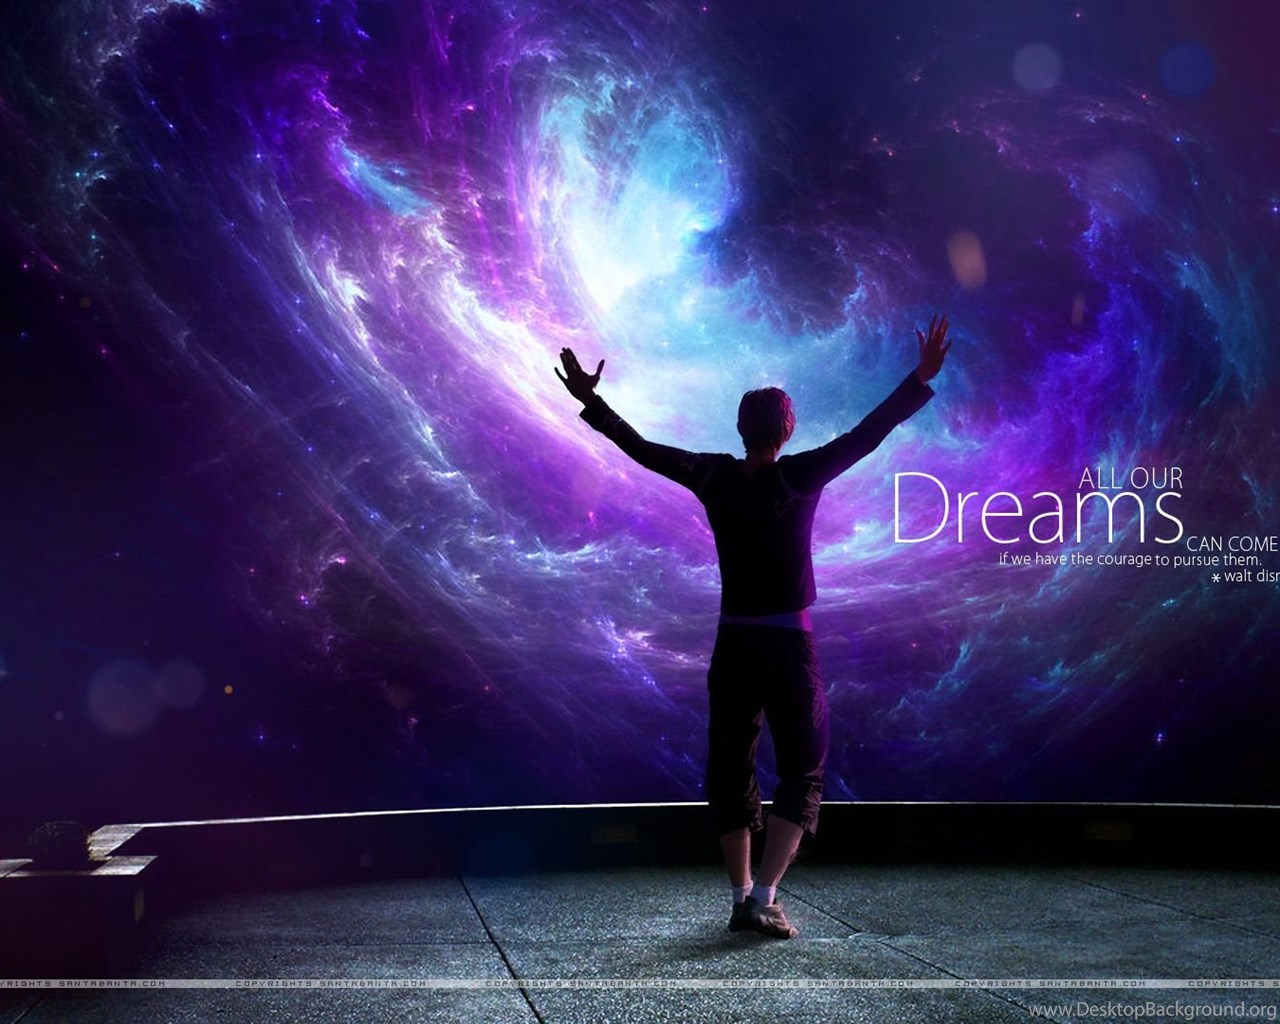 All Your Dreams Come True Wallpaper And Image Wallpaper. Desktop Background